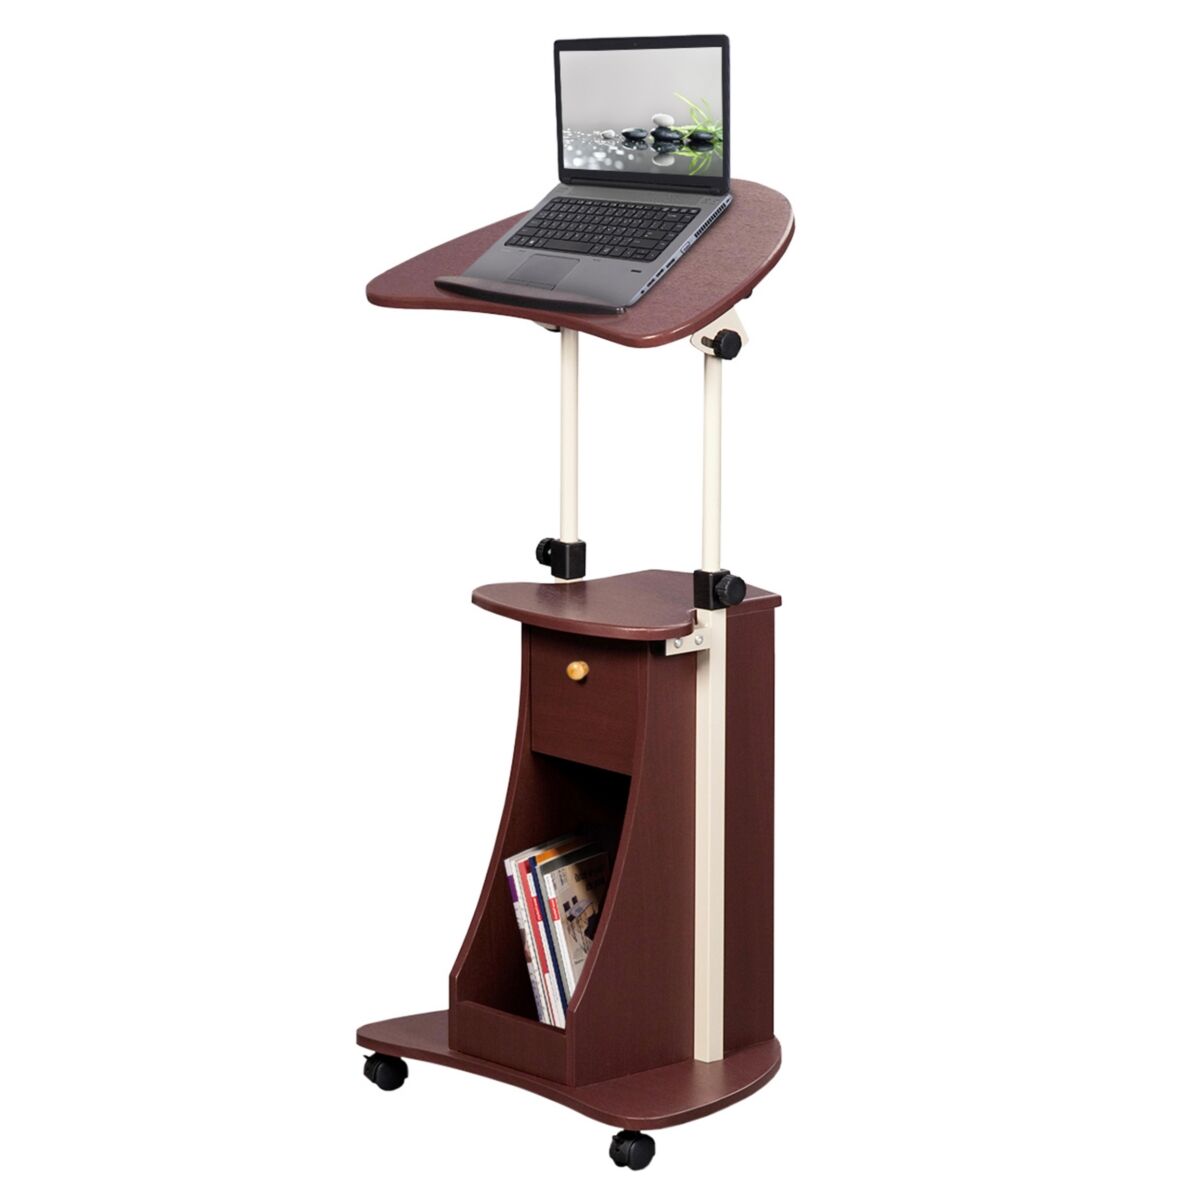 Simplie Fun Sit-to-Stand Rolling Adjustable Laptop Cart With Storage, Chocolate - Brown